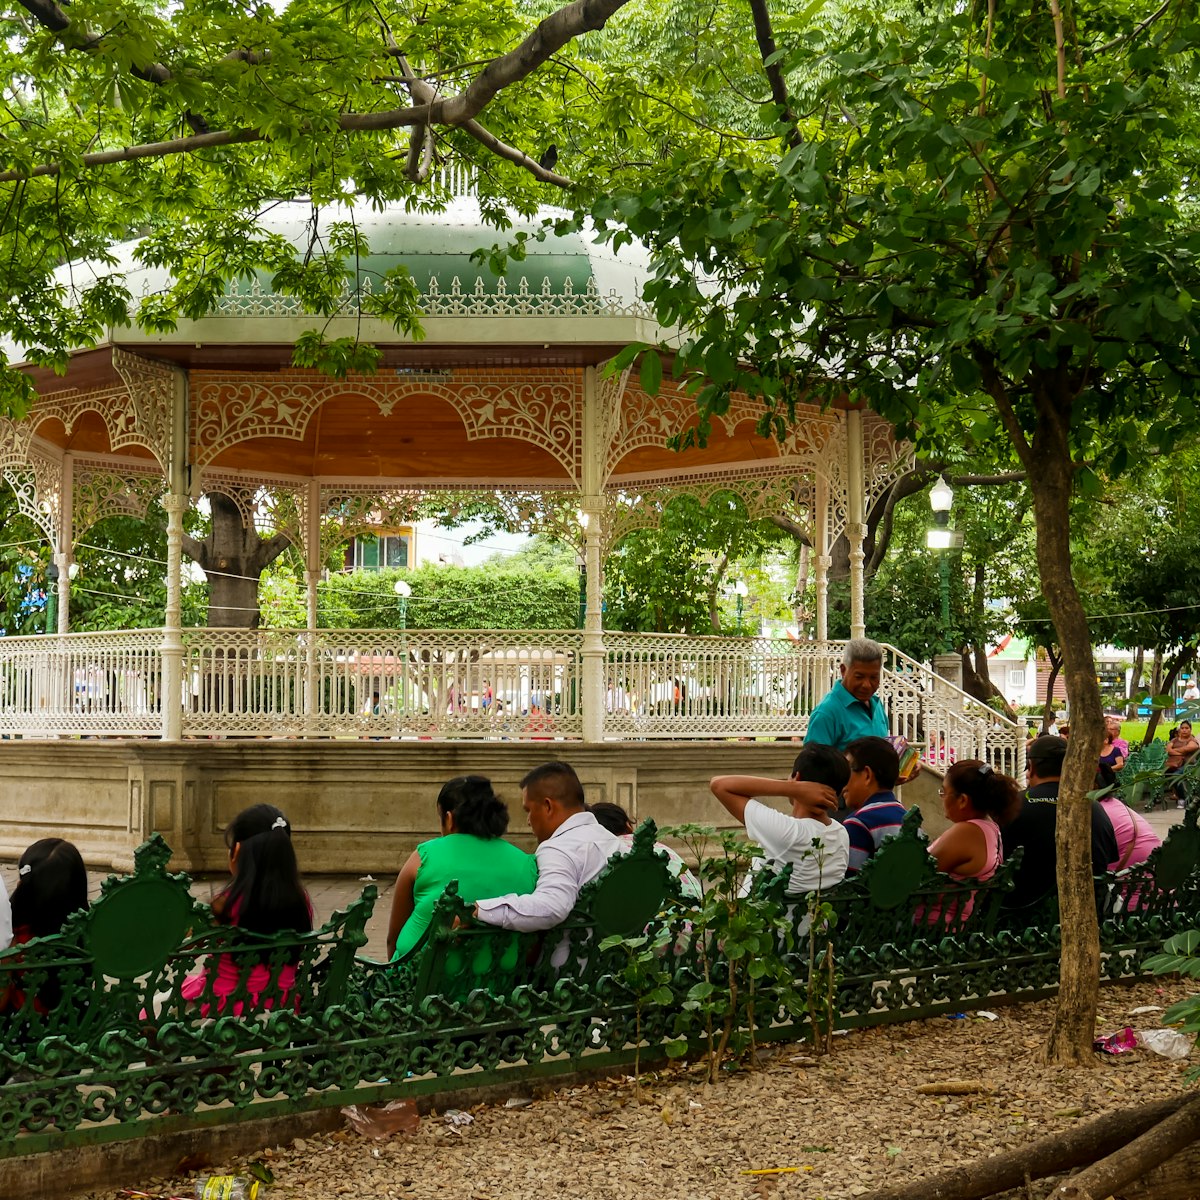 Locals relaxing on Marimba Park's benches in front of the picturesque bandstand in Tuxtla Gutiérrez, Mexico.